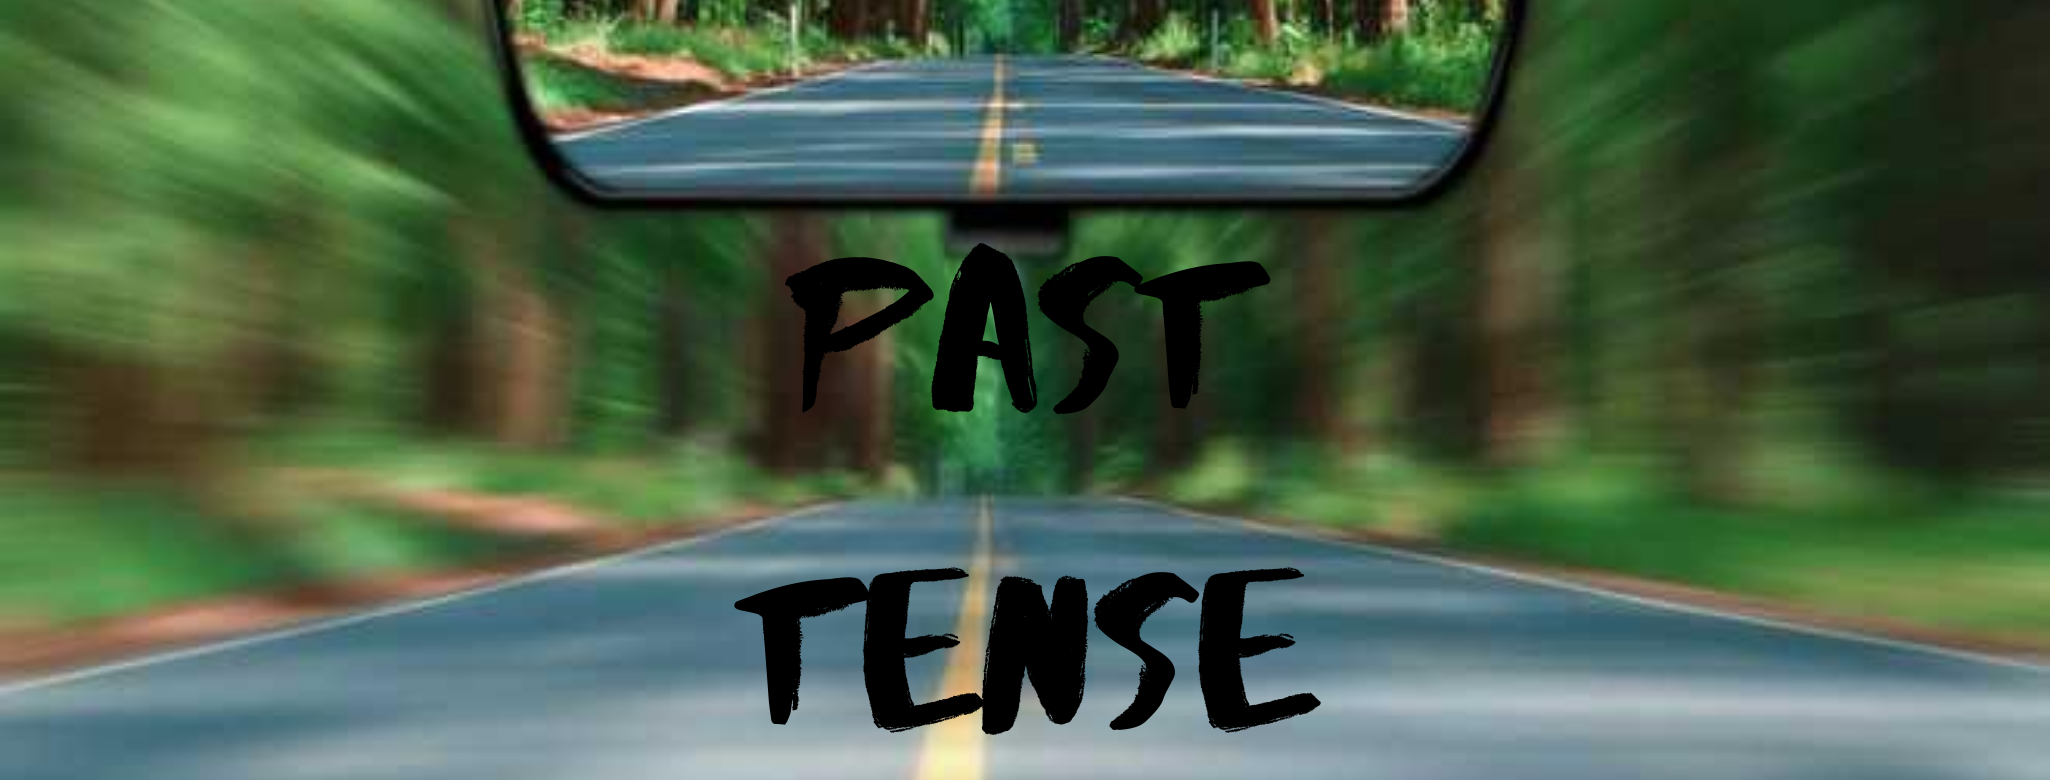 Past Tense & How To Use It